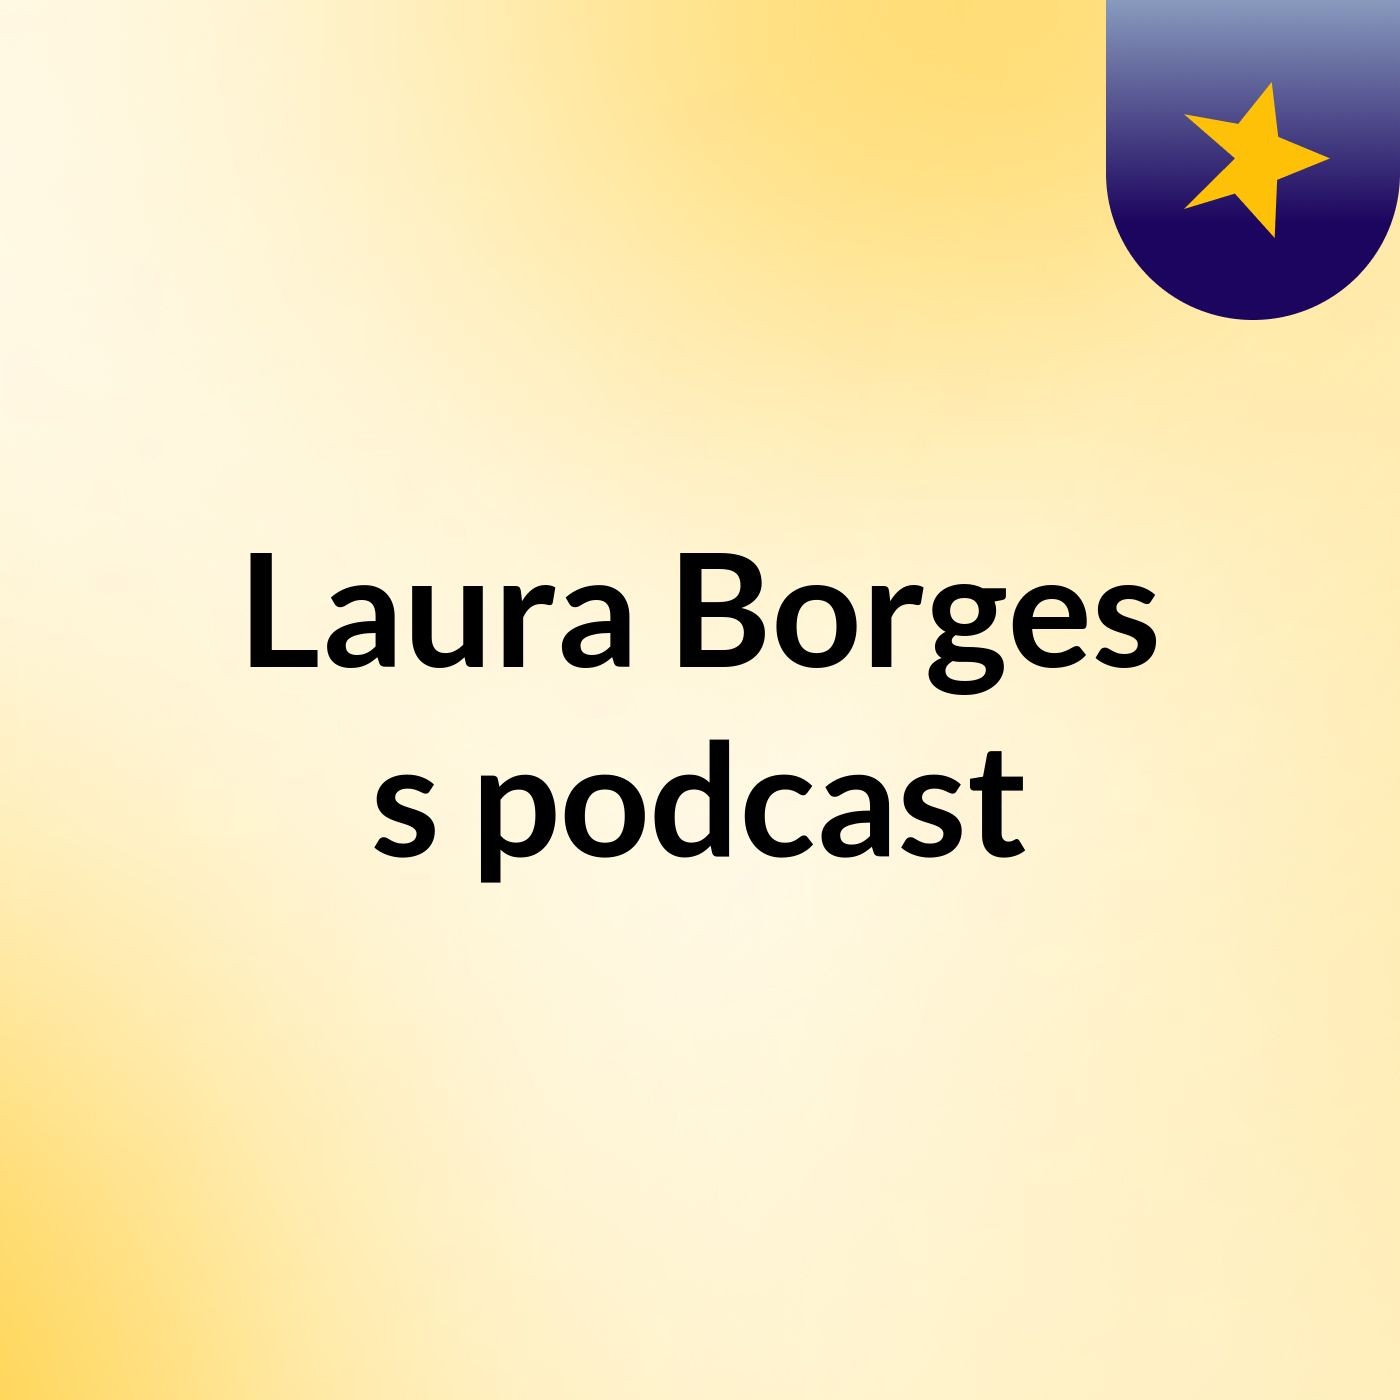 Laura Borges's podcast